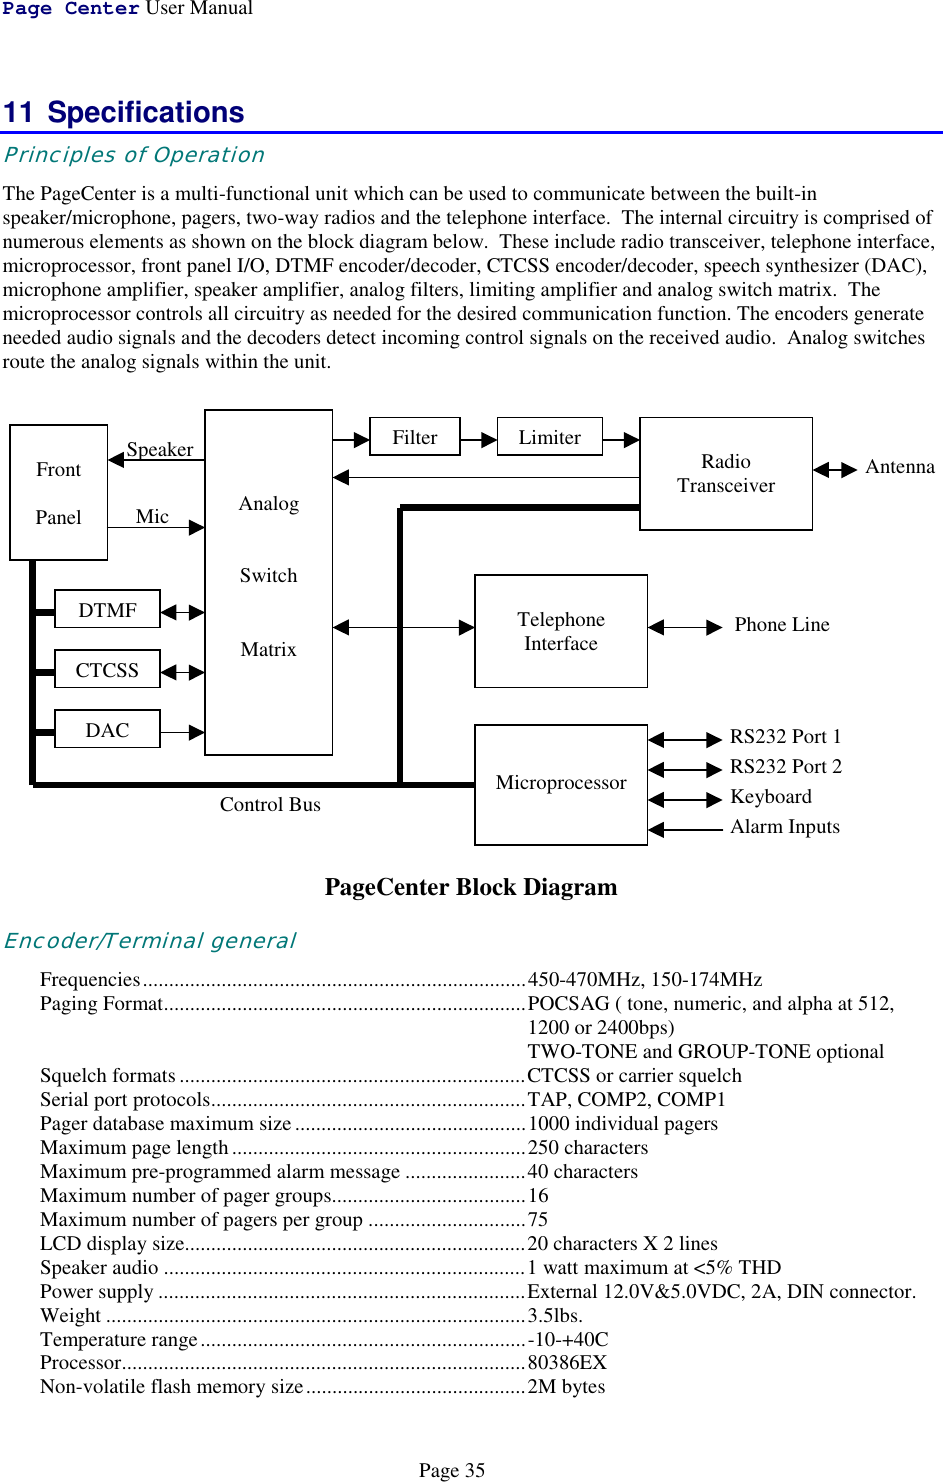 Page Center User ManualPage 3511 SpecificationsPrinciples of OperationThe PageCenter is a multi-functional unit which can be used to communicate between the built-inspeaker/microphone, pagers, two-way radios and the telephone interface.  The internal circuitry is comprised ofnumerous elements as shown on the block diagram below.  These include radio transceiver, telephone interface,microprocessor, front panel I/O, DTMF encoder/decoder, CTCSS encoder/decoder, speech synthesizer (DAC),microphone amplifier, speaker amplifier, analog filters, limiting amplifier and analog switch matrix.  Themicroprocessor controls all circuitry as needed for the desired communication function. The encoders generateneeded audio signals and the decoders detect incoming control signals on the received audio.  Analog switchesroute the analog signals within the unit.PageCenter Block DiagramEncoder/Terminal generalFrequencies.........................................................................450-470MHz, 150-174MHzPaging Format.....................................................................POCSAG ( tone, numeric, and alpha at 512,1200 or 2400bps)TWO-TONE and GROUP-TONE optionalSquelch formats..................................................................CTCSS or carrier squelchSerial port protocols............................................................TAP, COMP2, COMP1Pager database maximum size............................................1000 individual pagersMaximum page length ........................................................250 charactersMaximum pre-programmed alarm message .......................40 charactersMaximum number of pager groups.....................................16Maximum number of pagers per group ..............................75LCD display size.................................................................20 characters X 2 linesSpeaker audio .....................................................................1 watt maximum at &lt;5% THDPower supply ......................................................................External 12.0V&amp;5.0VDC, 2A, DIN connector.Weight ................................................................................3.5lbs.Temperature range..............................................................-10-+40CProcessor.............................................................................80386EXNon-volatile flash memory size..........................................2M bytesControl BusMicSpeakerAntennaAnalogSwitchMatrixRadioTransceiverFrontPanelFilterLimiterTelephoneInterface Phone LineDTMFCTCSSDACMicroprocessorRS232 Port 1RS232 Port 2KeyboardAlarm Inputs